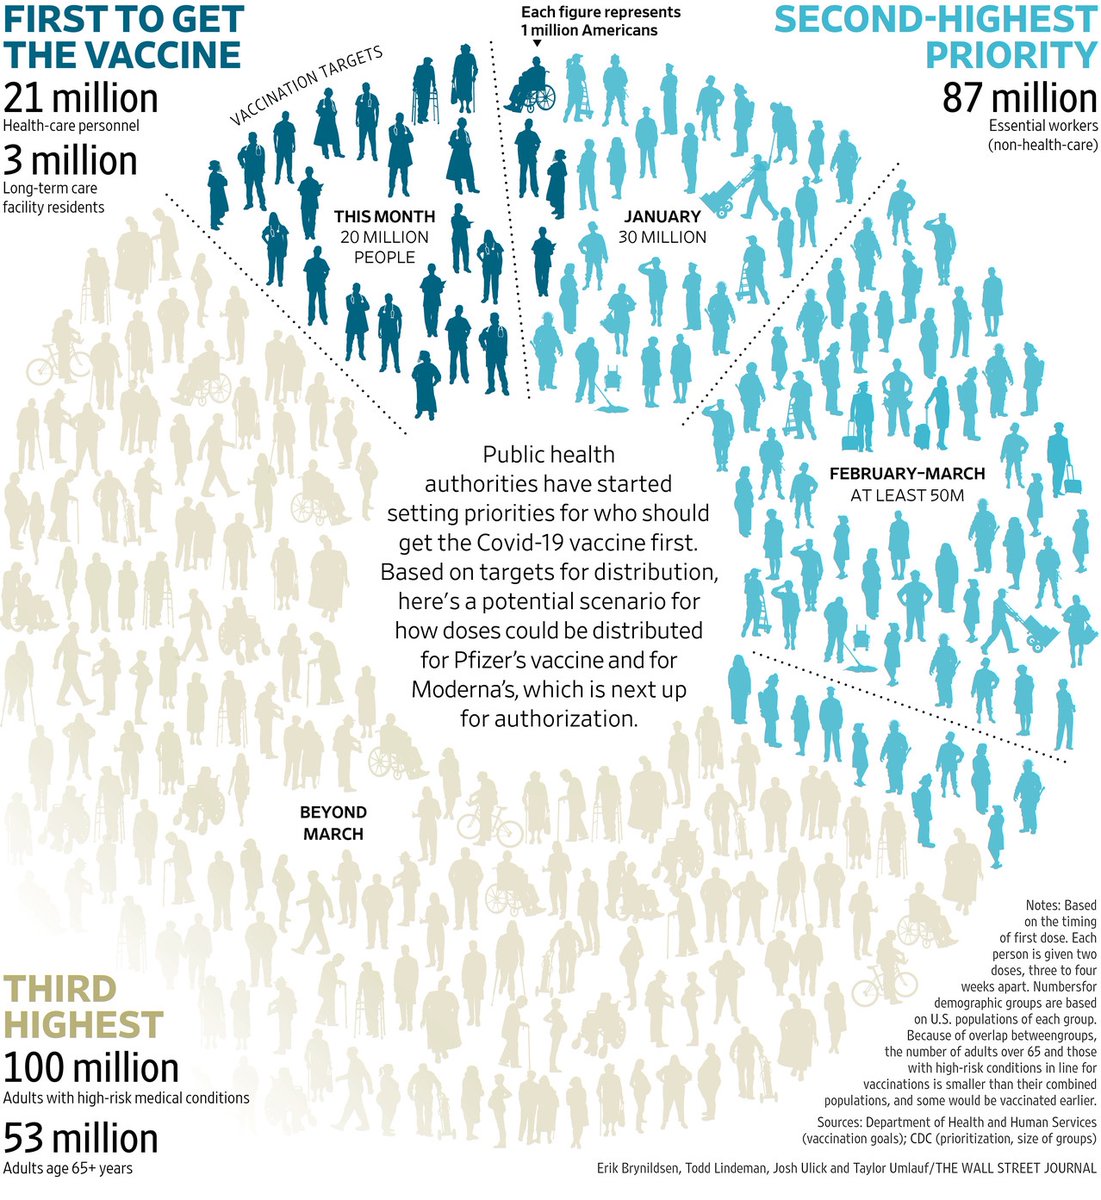 The United States has an ambitious plan to get to population level immunity, but it doesn't have the vaccines to accomplish it (no less the buy in of Americans)@WSJgraphic by  @ErikBrynildsen  @joshulick  @TaylorUmlauf  @toddlindeman /1